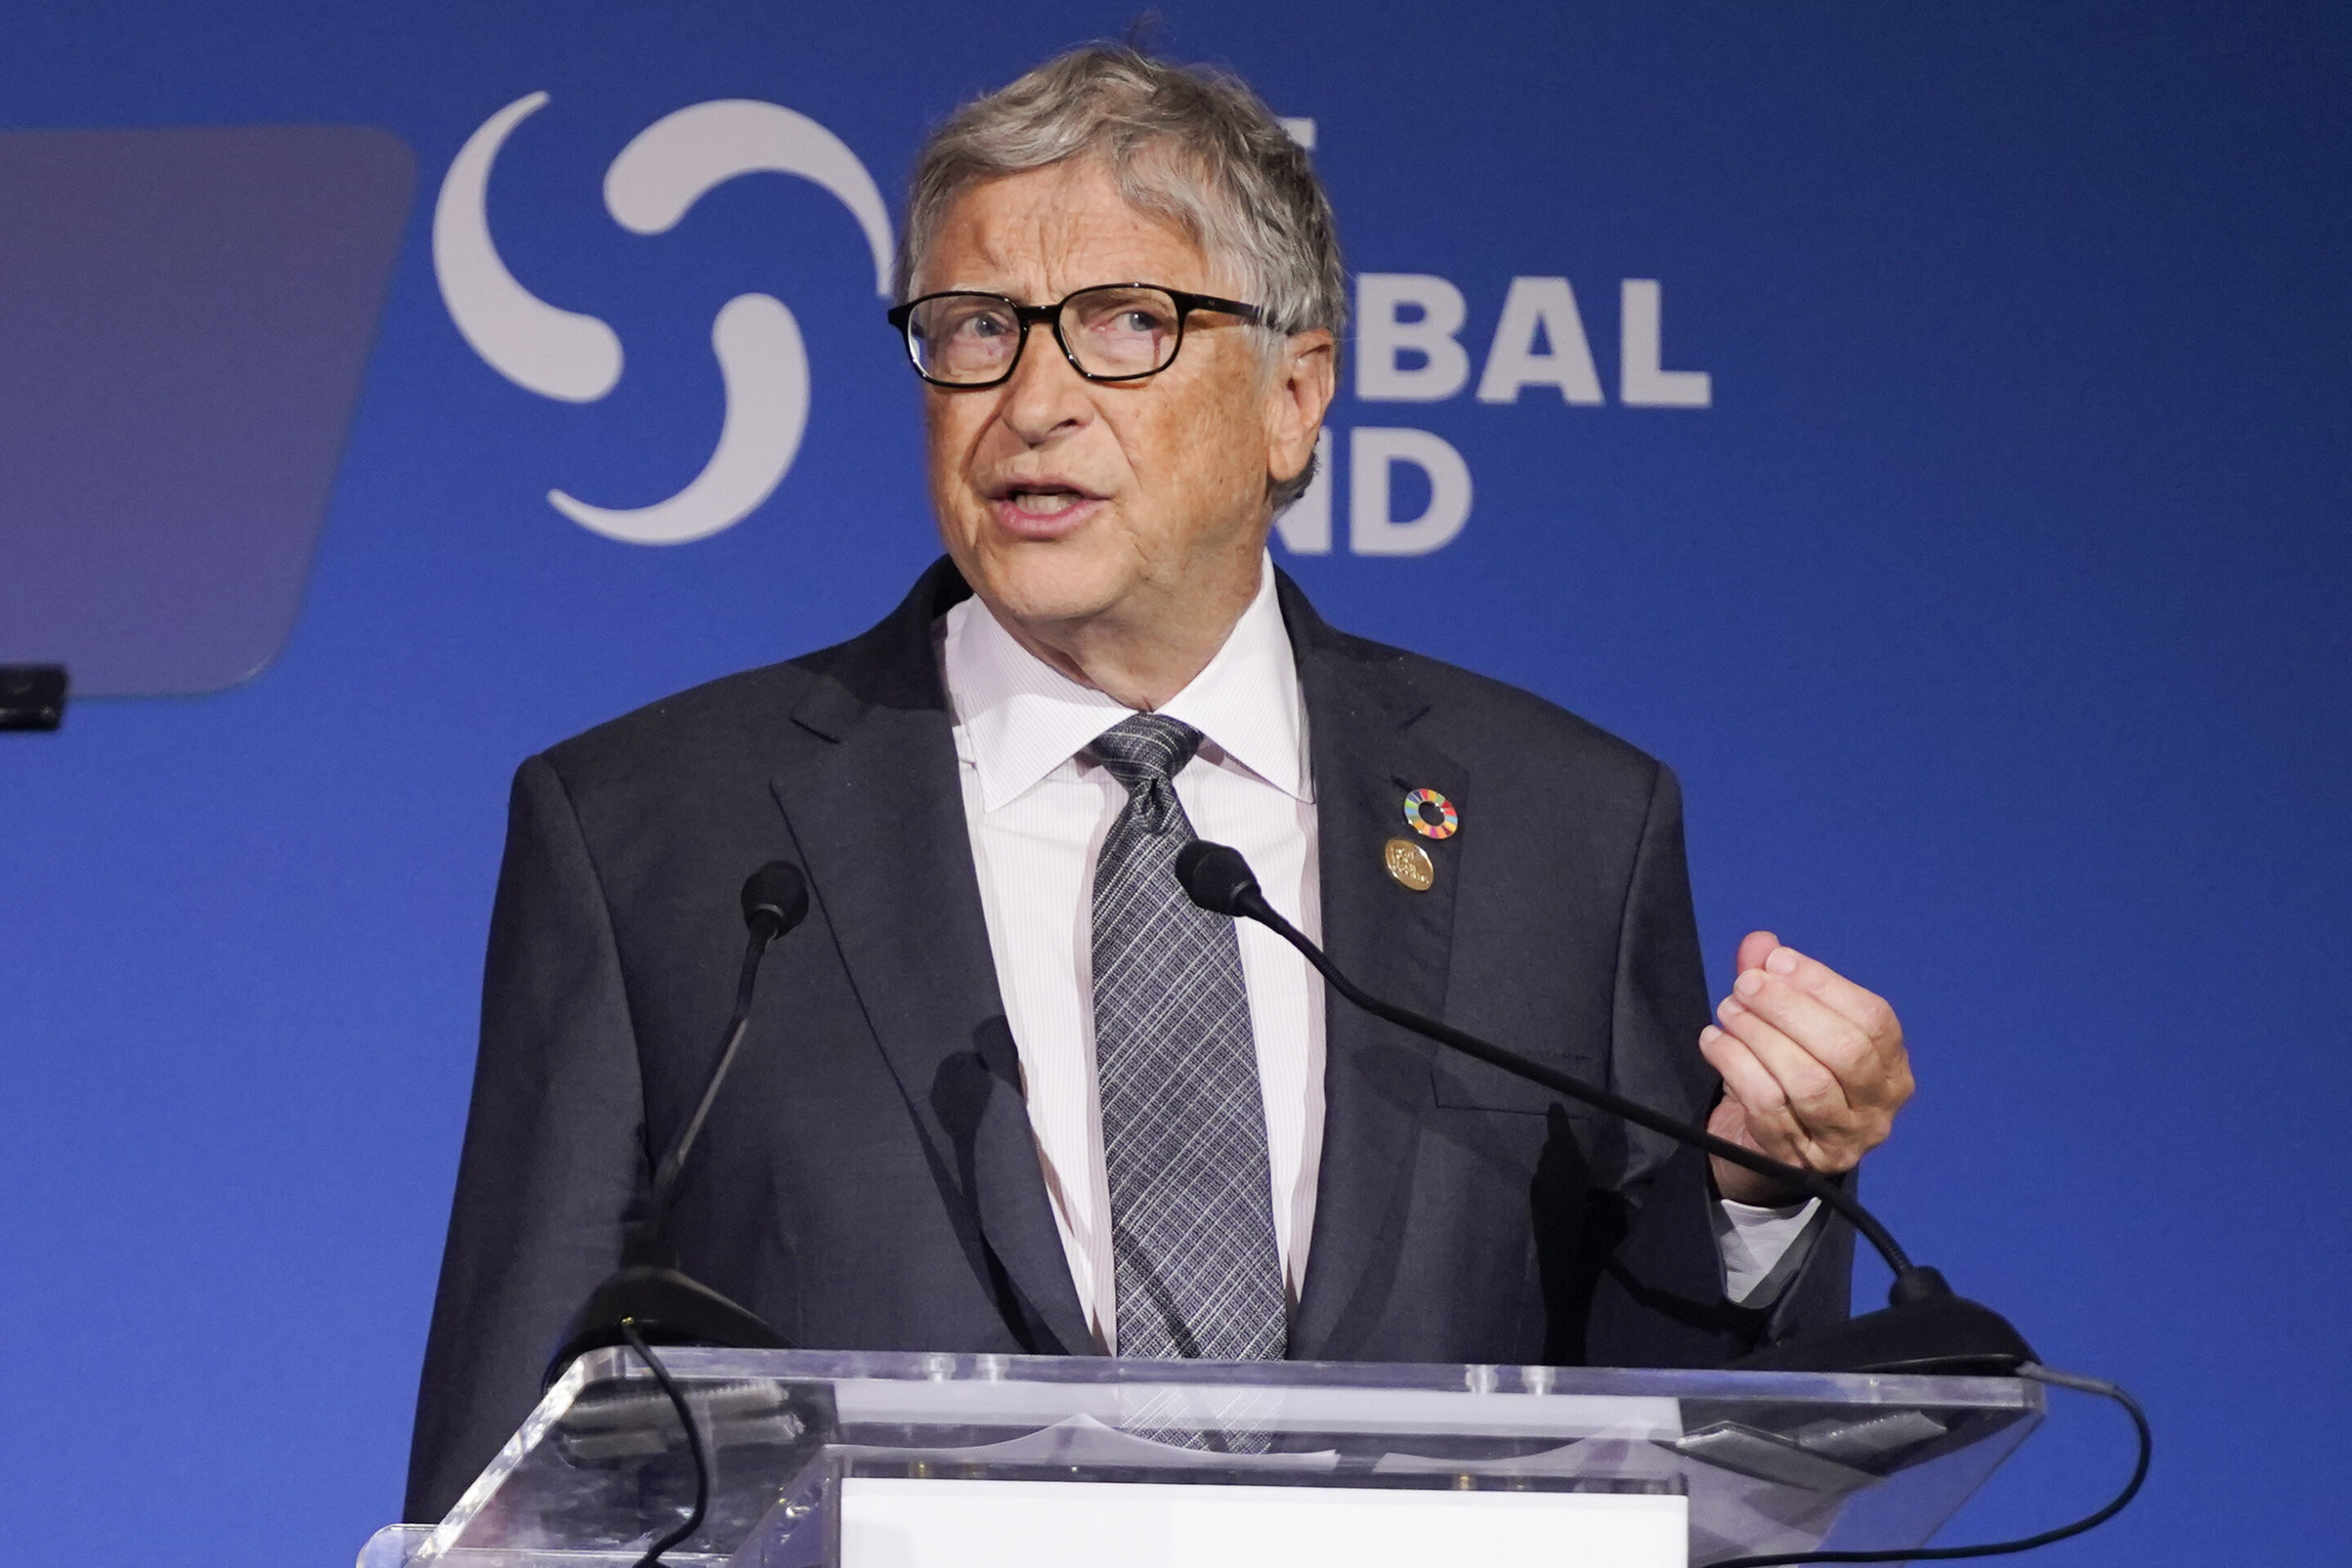 #Bill Gates considers W.Va. to expand nuclear energy efforts